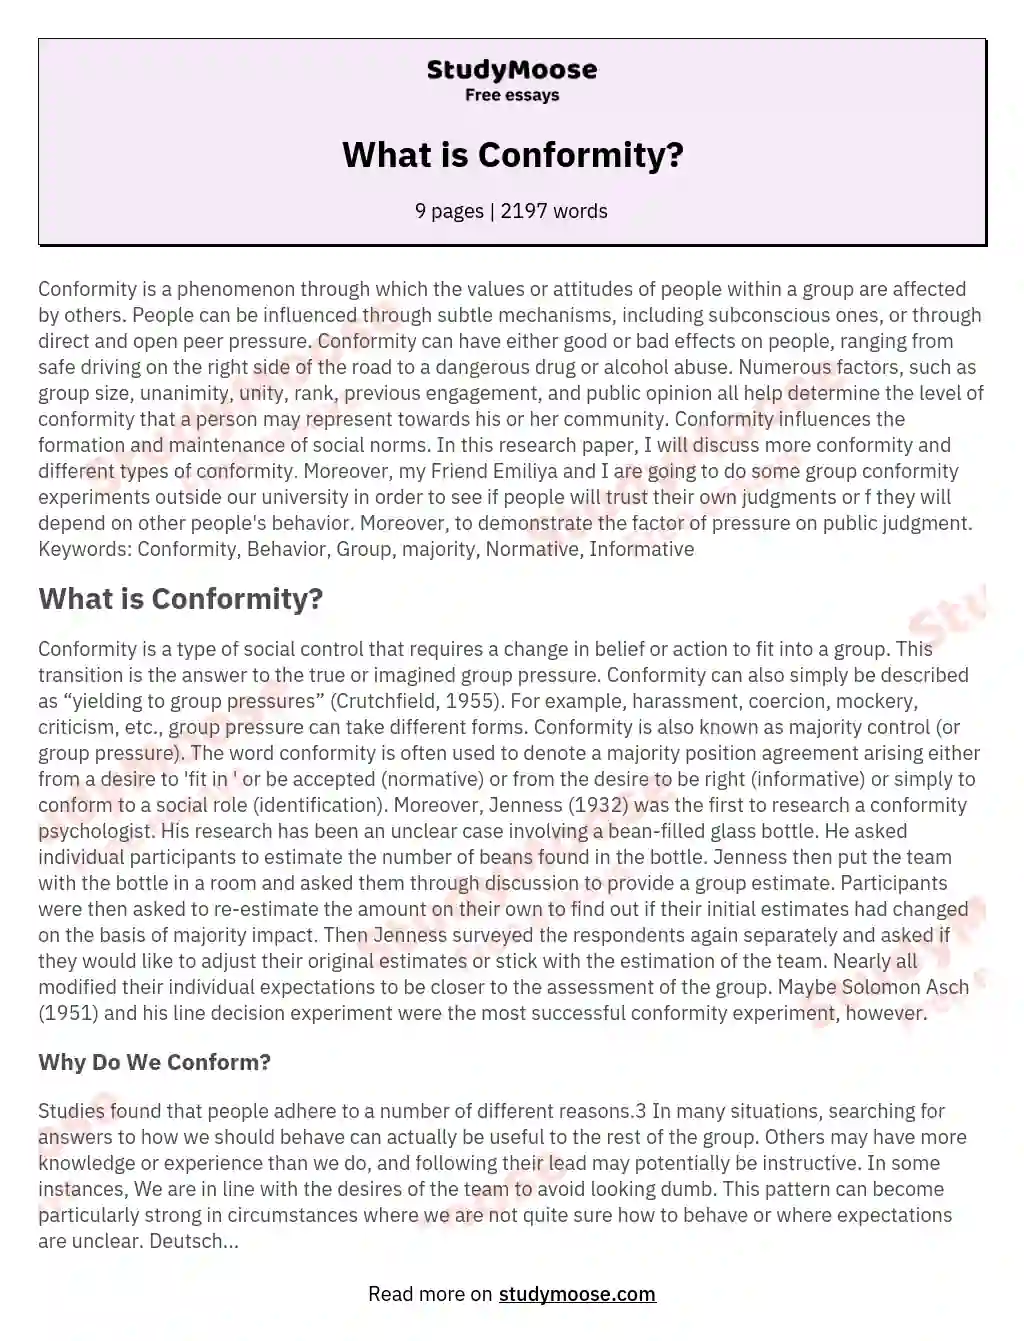 What is Conformity? essay